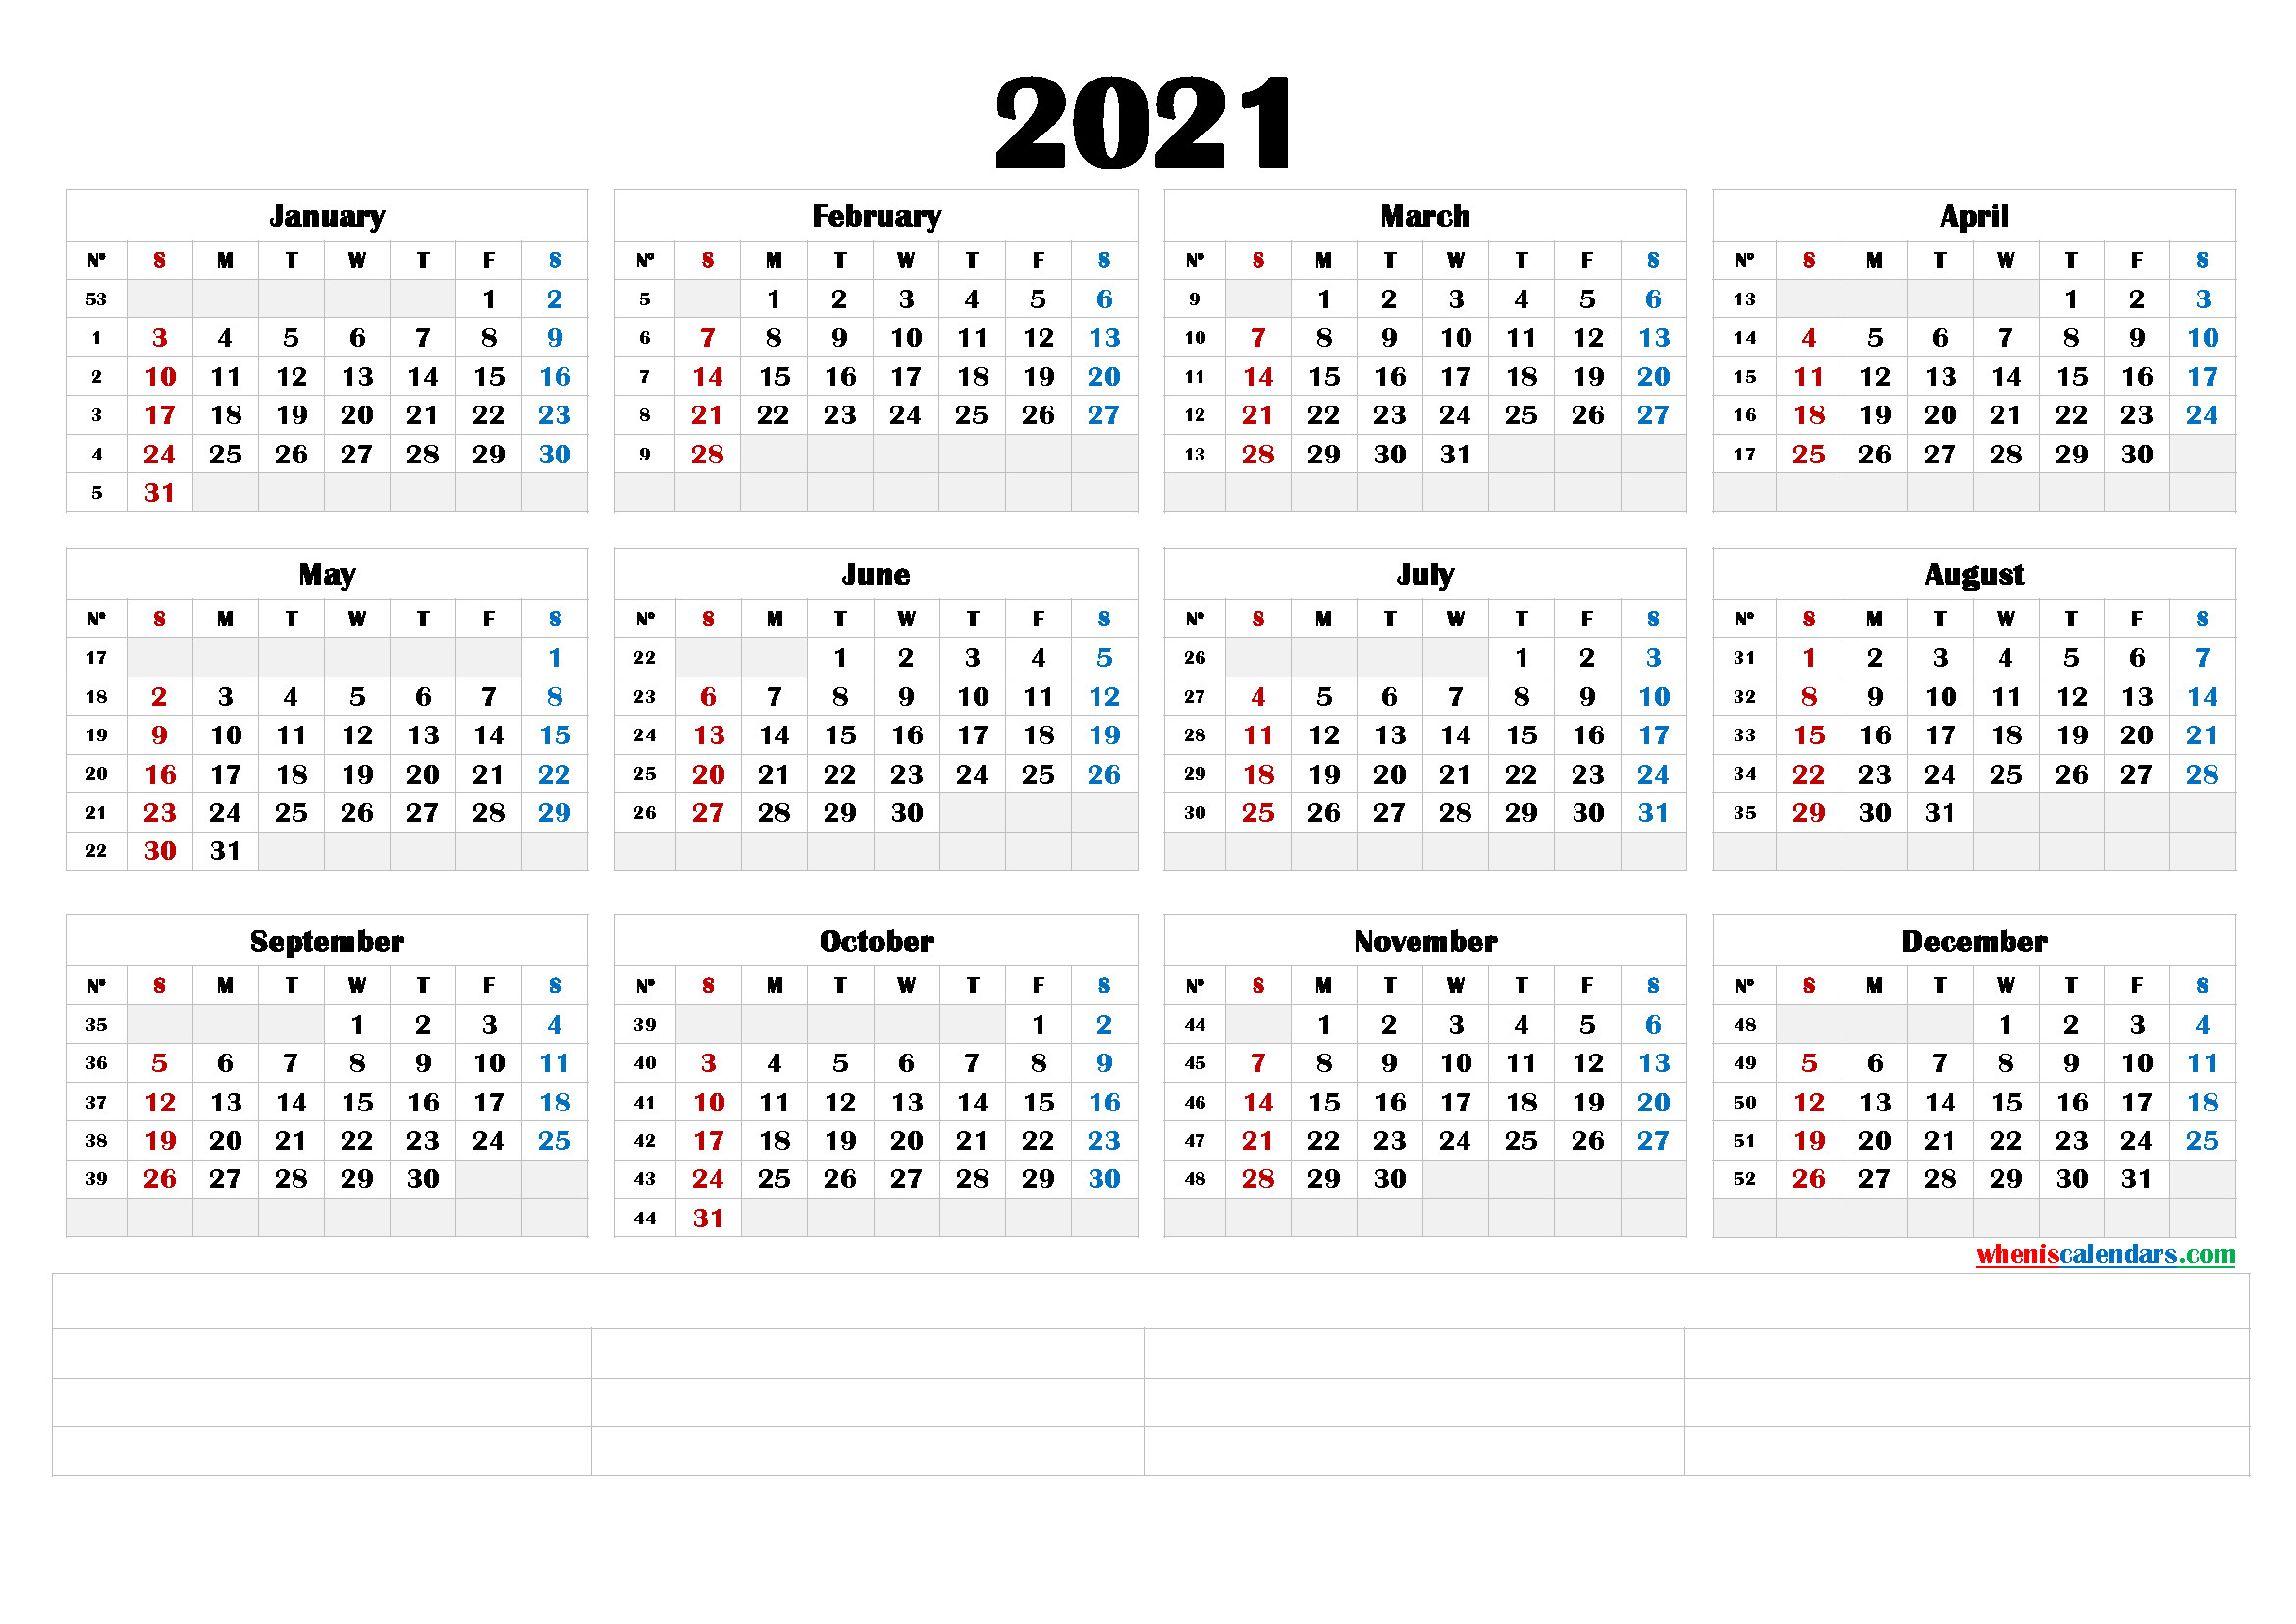 Free 2021 Yearly Calender Template - 24 Pretty Free-2 Page 2021 Calendar Template